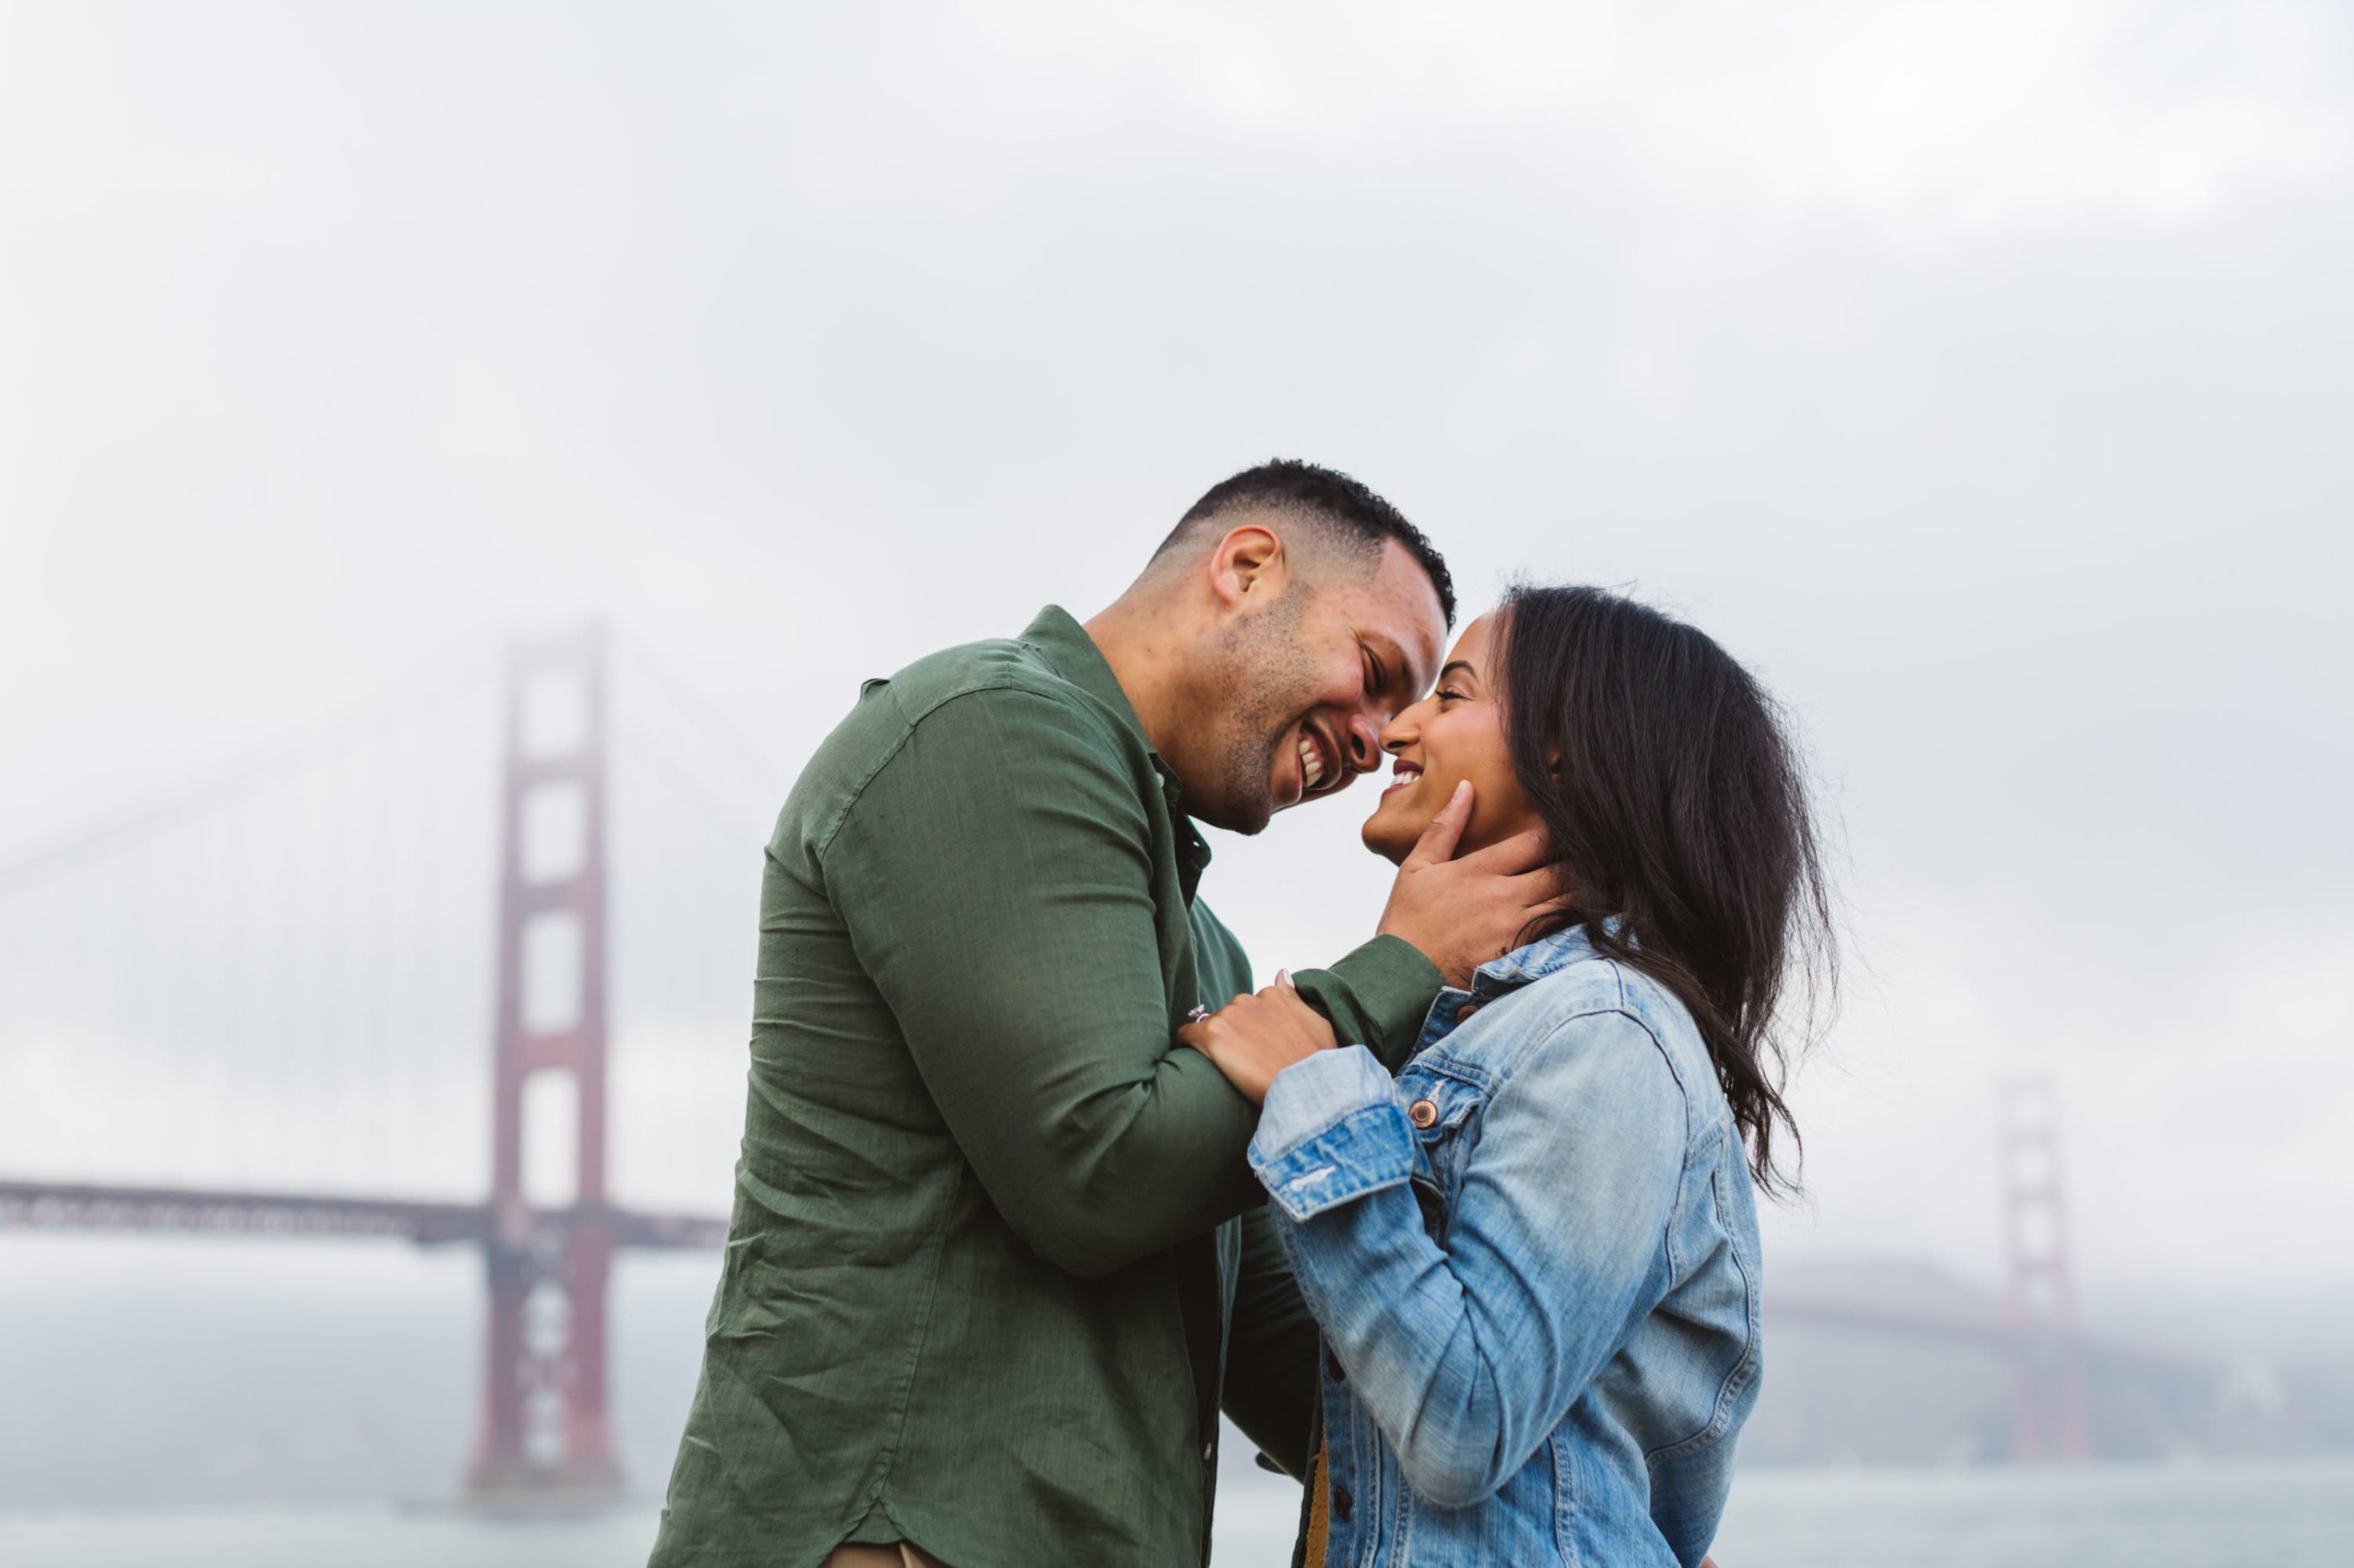 photos from crissy field, san francisco engagement photography location